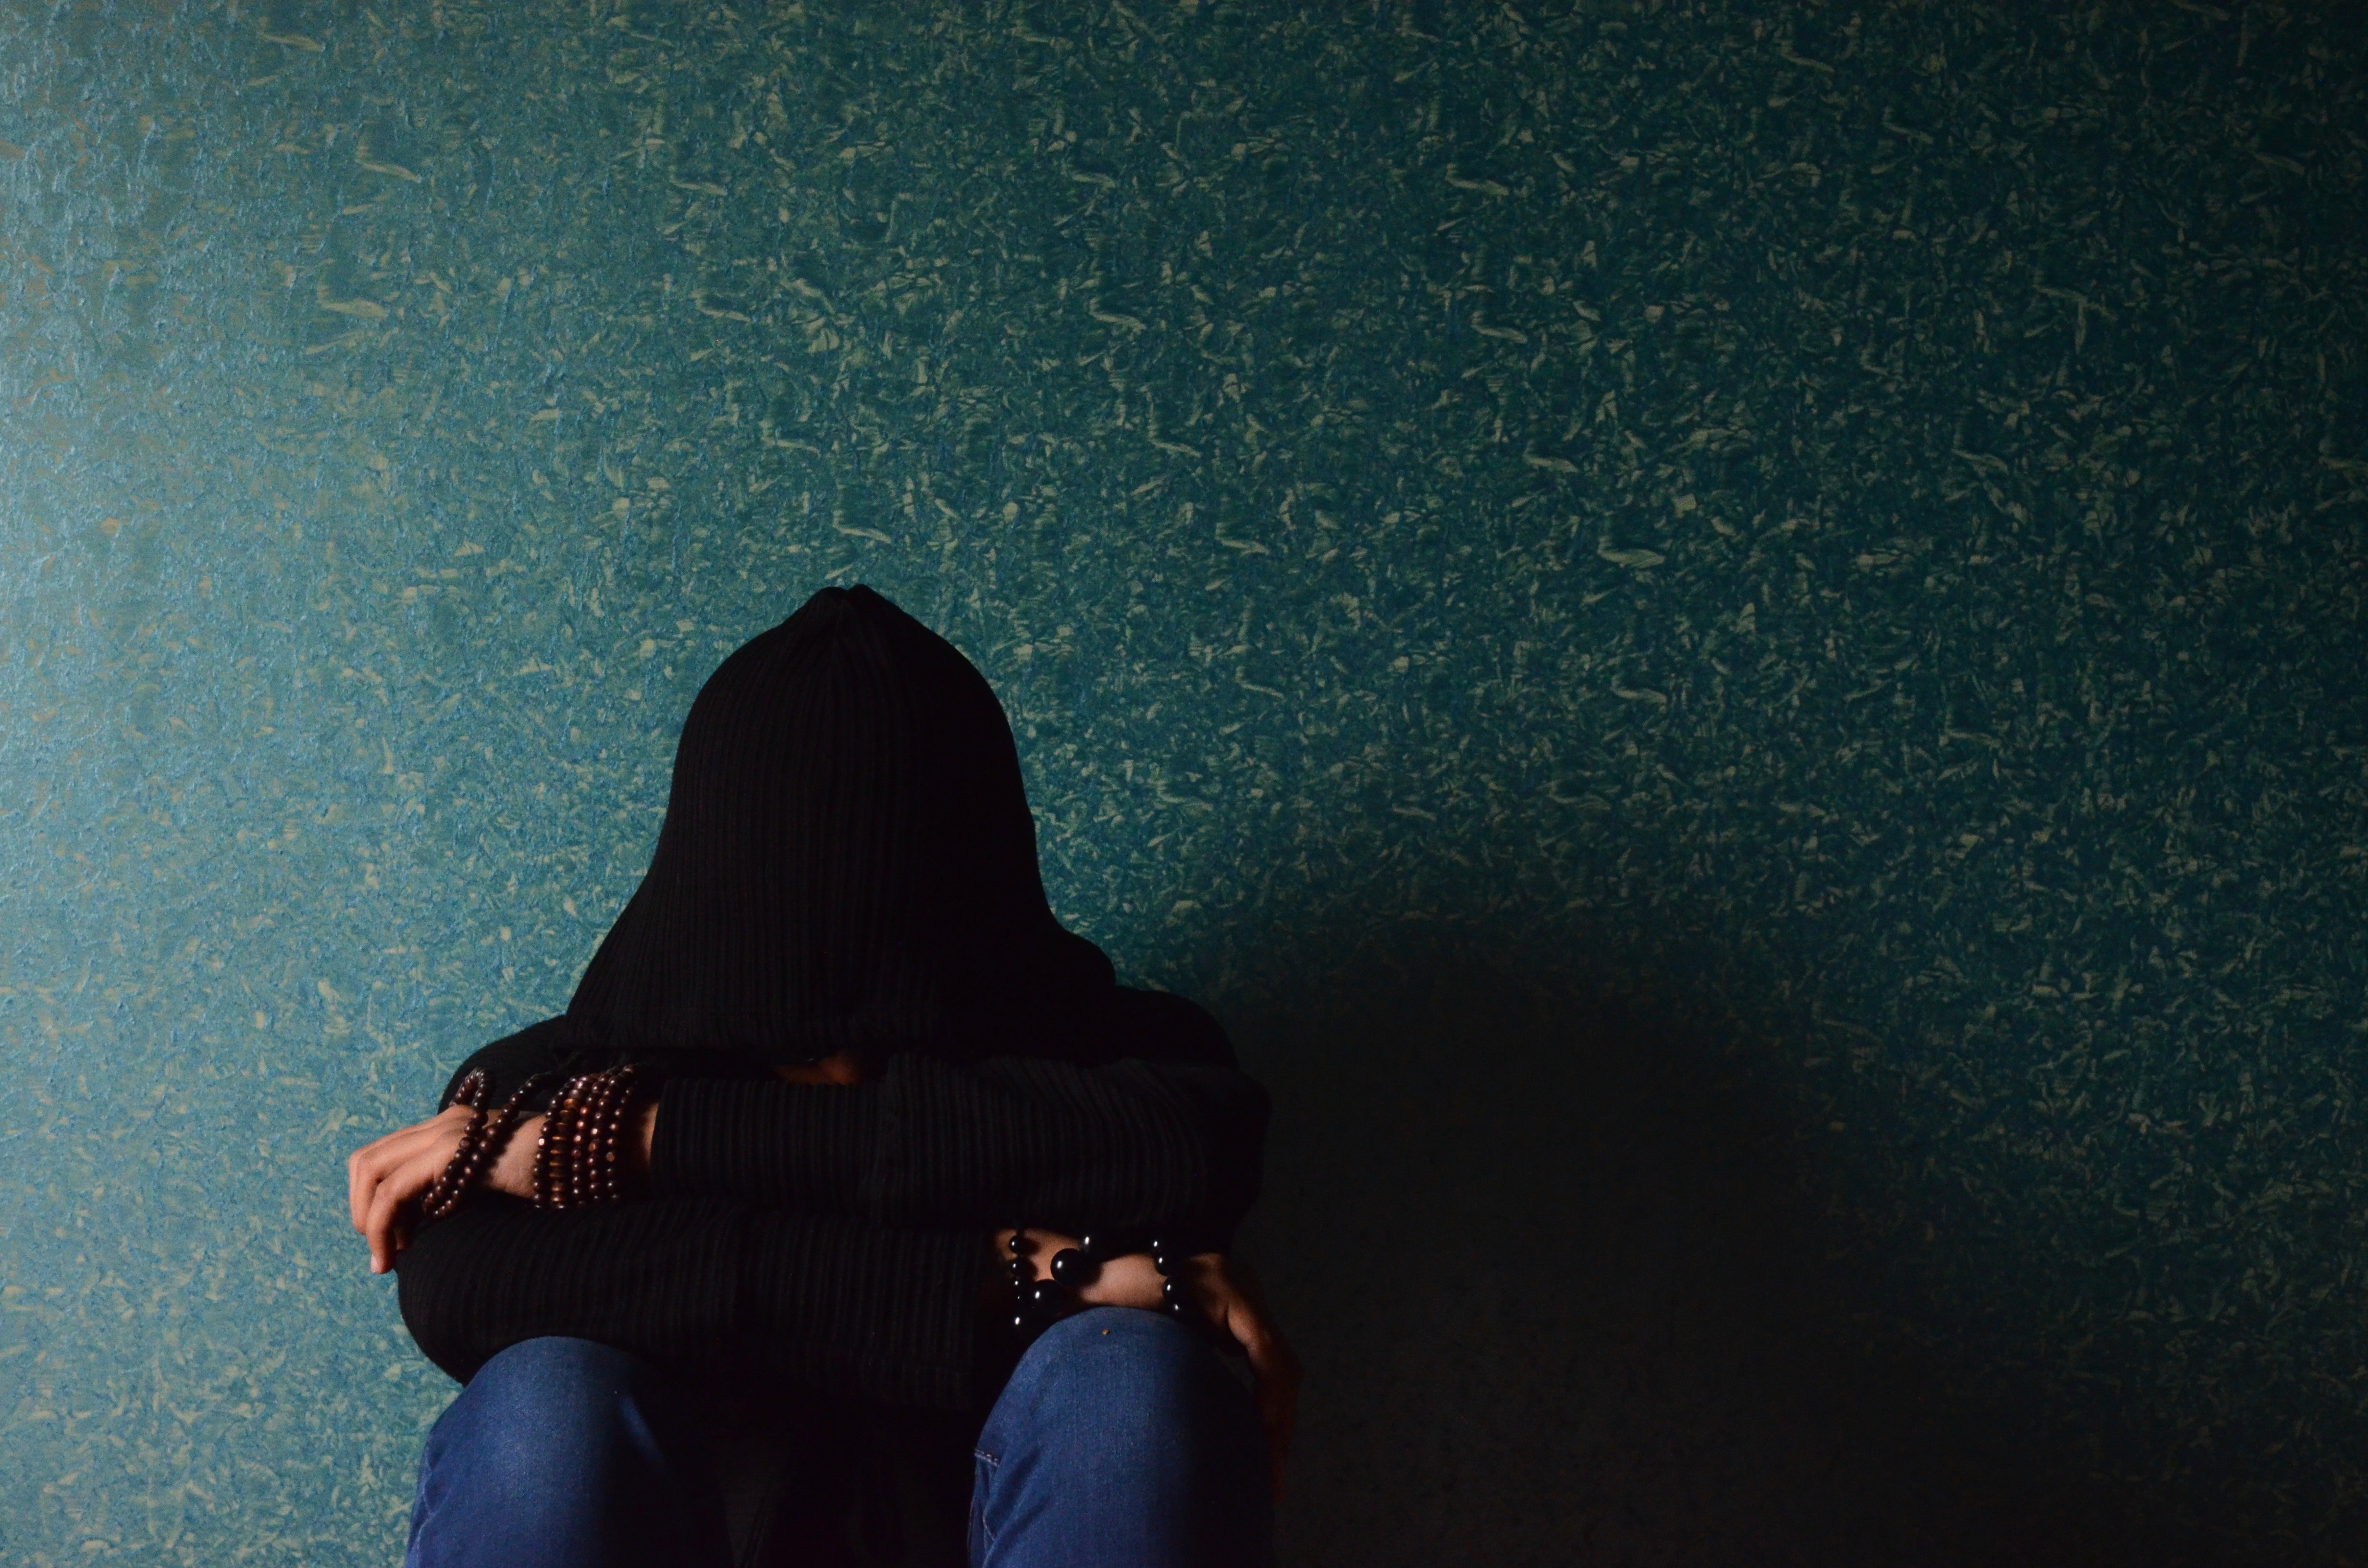 Behavioral Health – Have you or someone you know thought about suicide? You’re not alone.